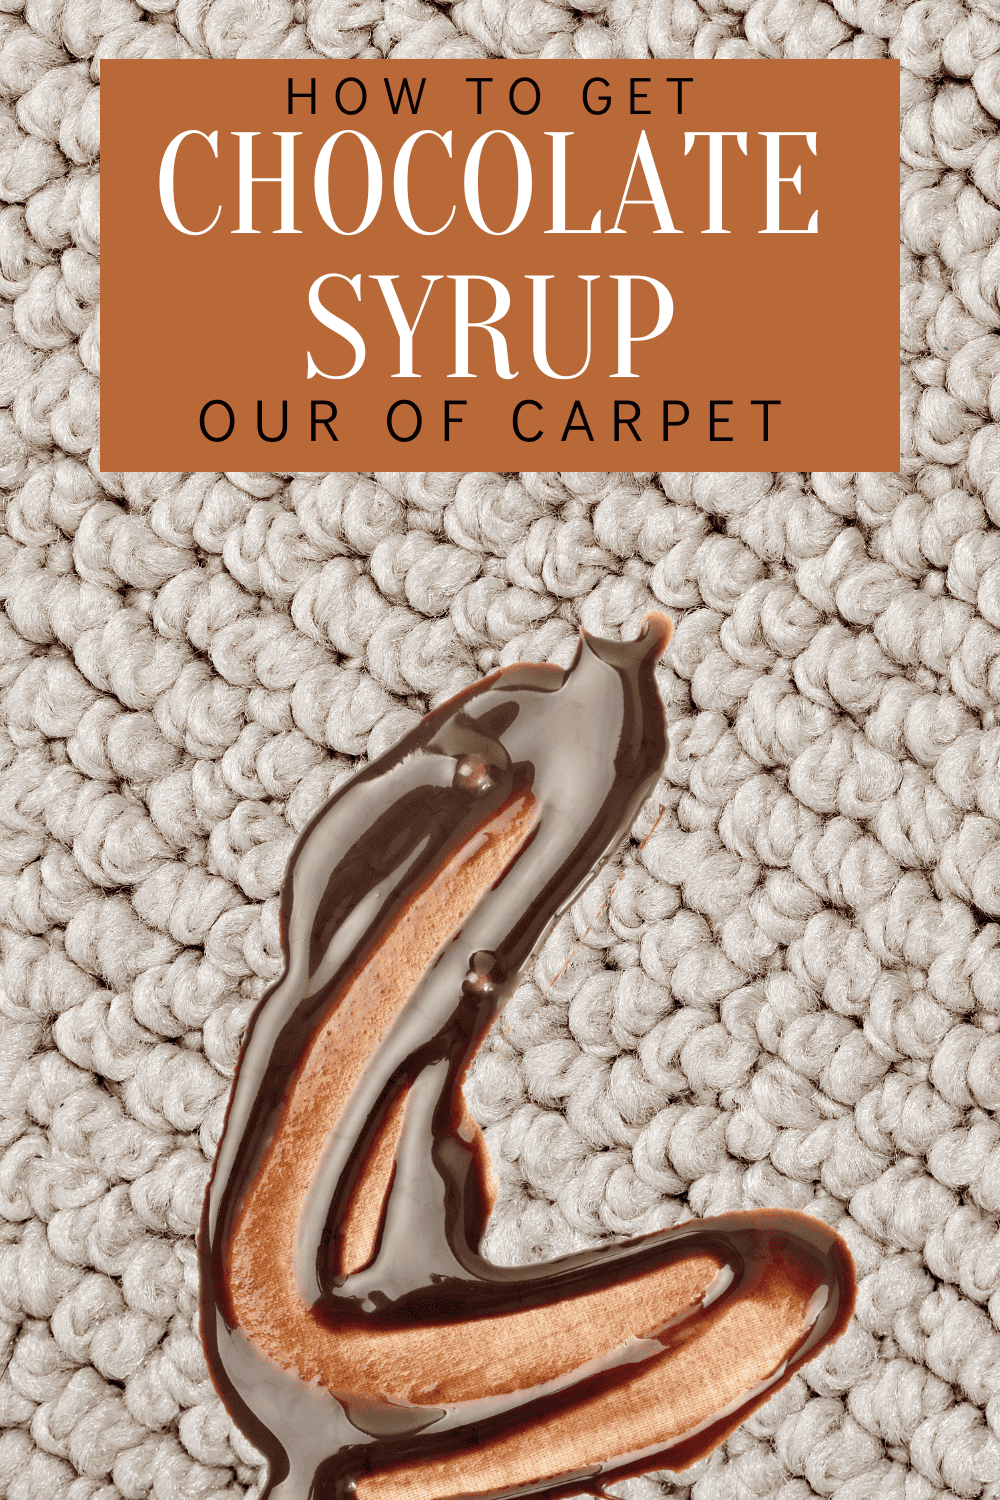 Chocolate syup on carpet. text that reads:How to get chocoate syrup out of carpet